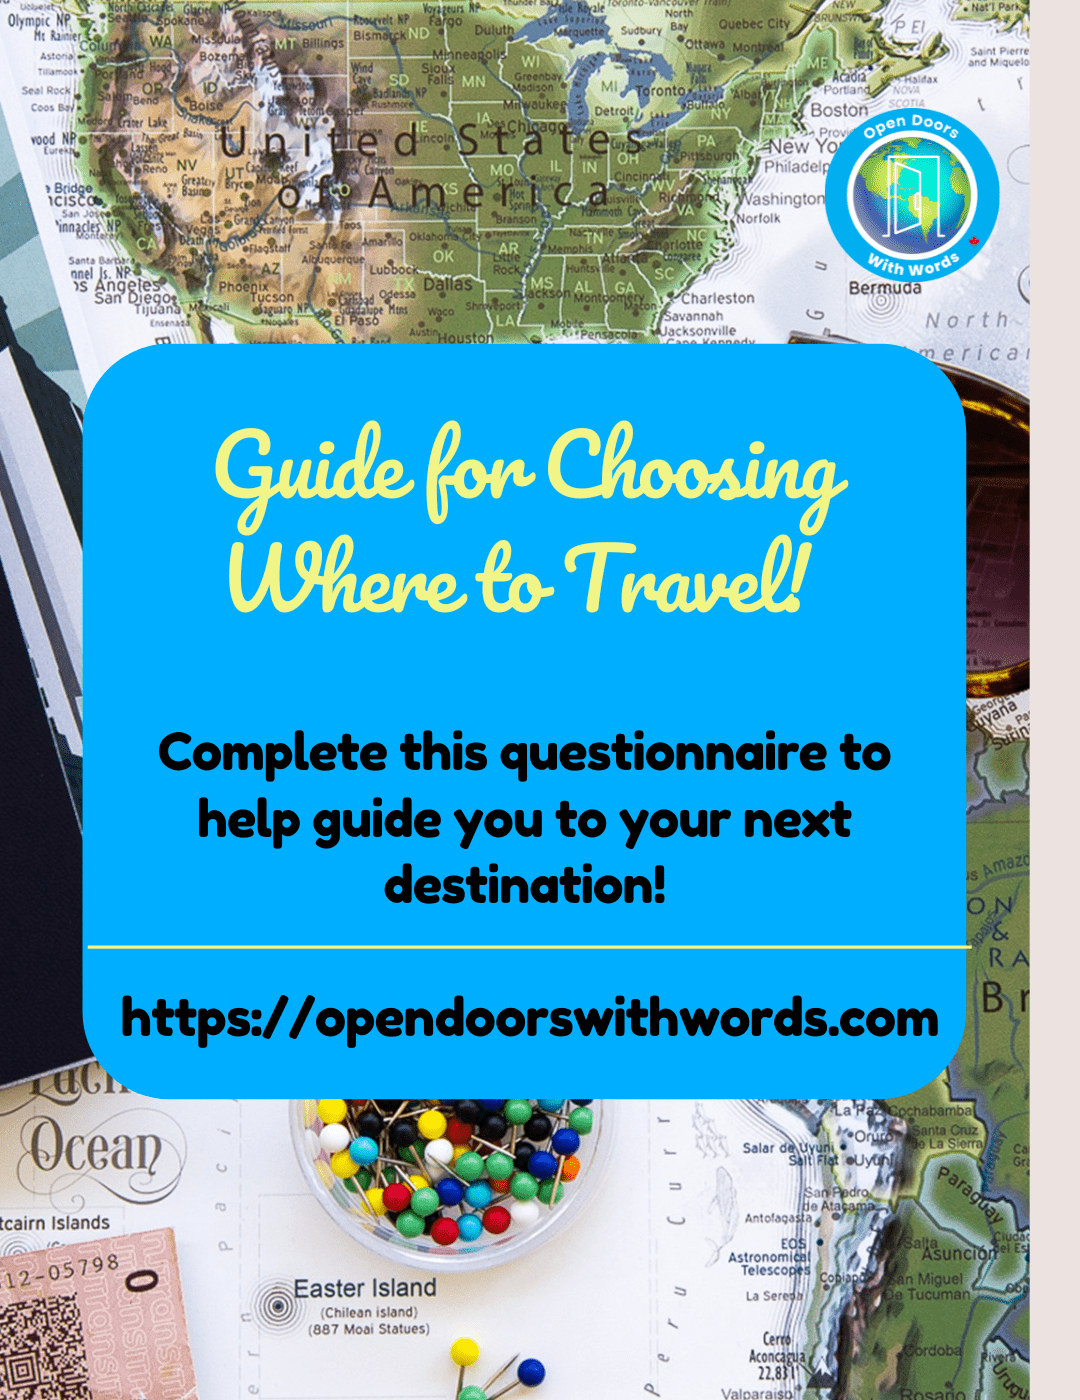 Guide to Choosing Where to Travel